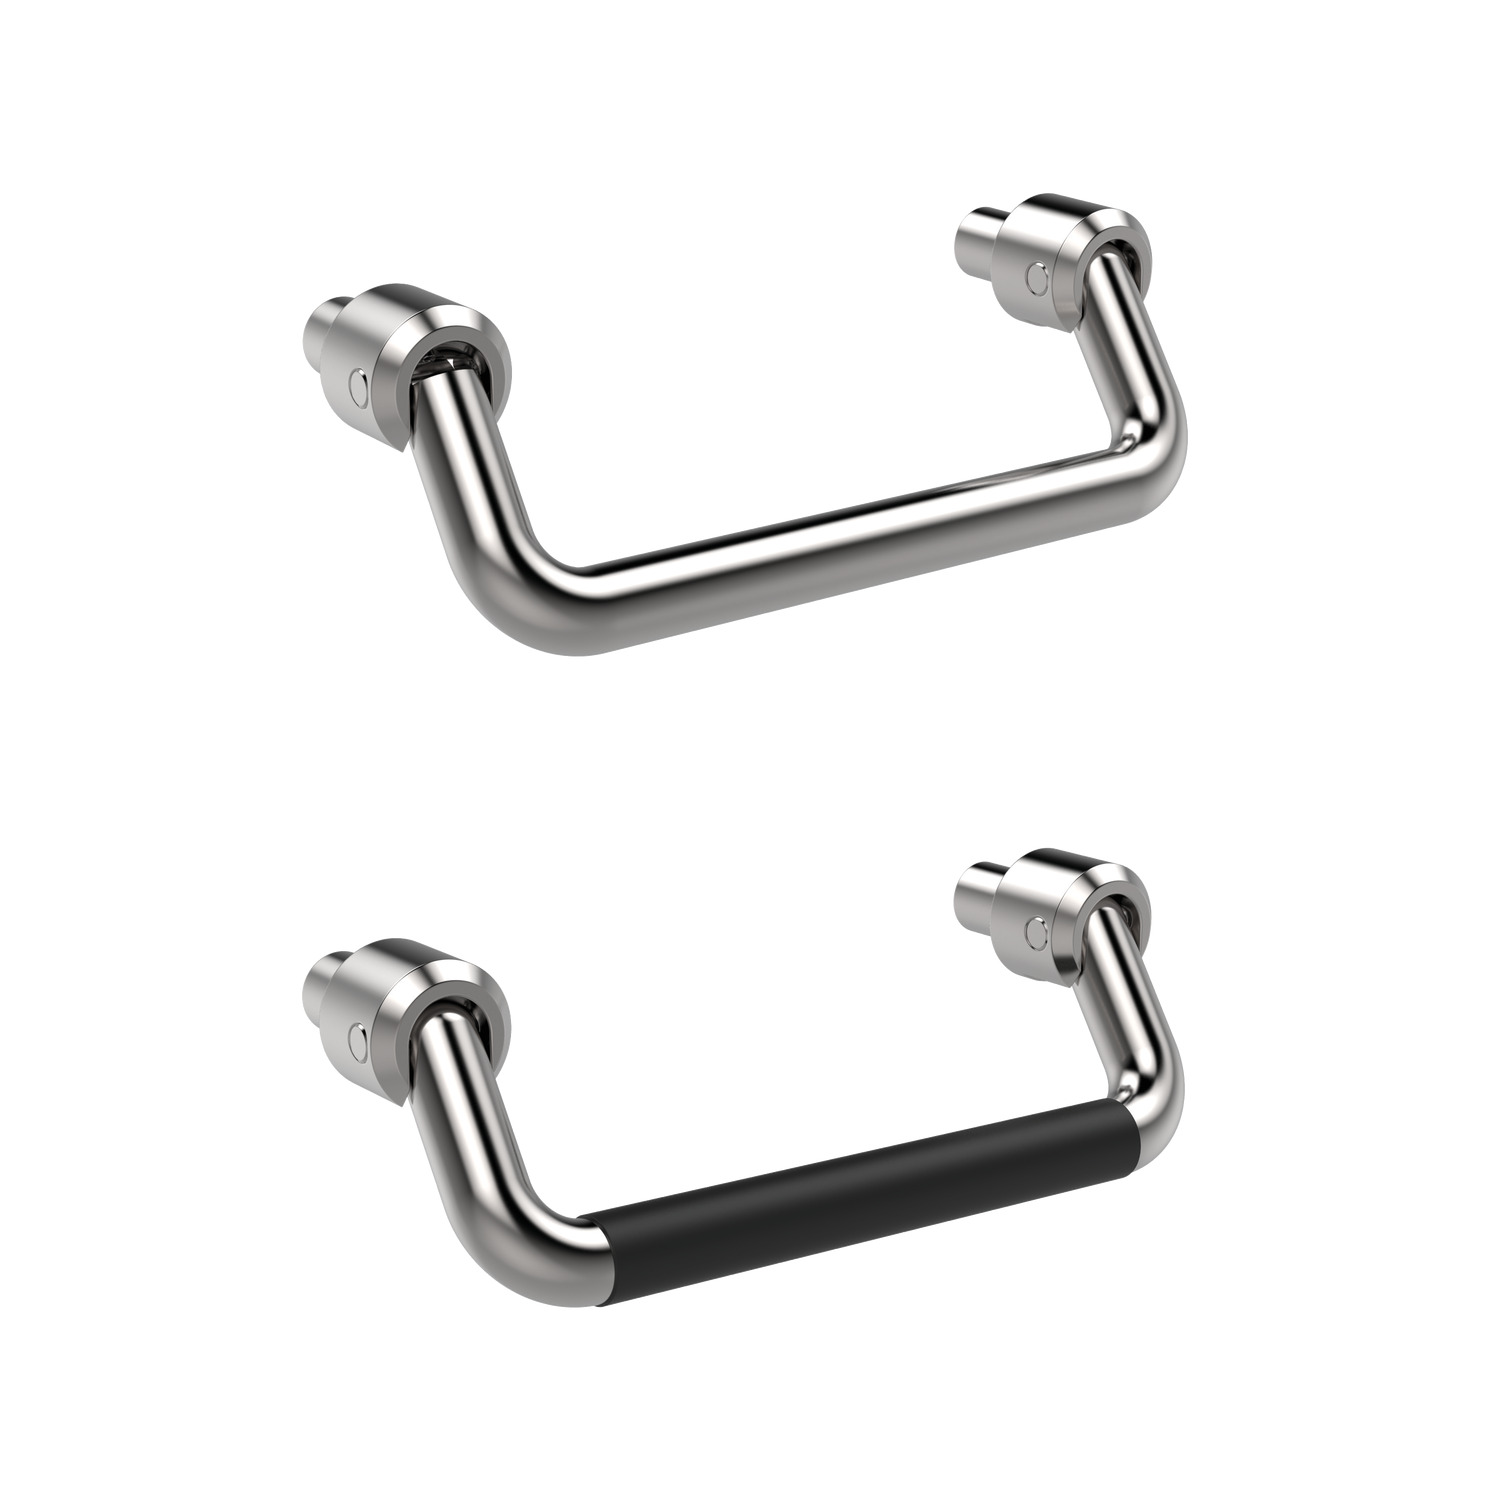 79570.W0180 Pull Handles, Collapsible - Steel Without Plastic Grip - 180